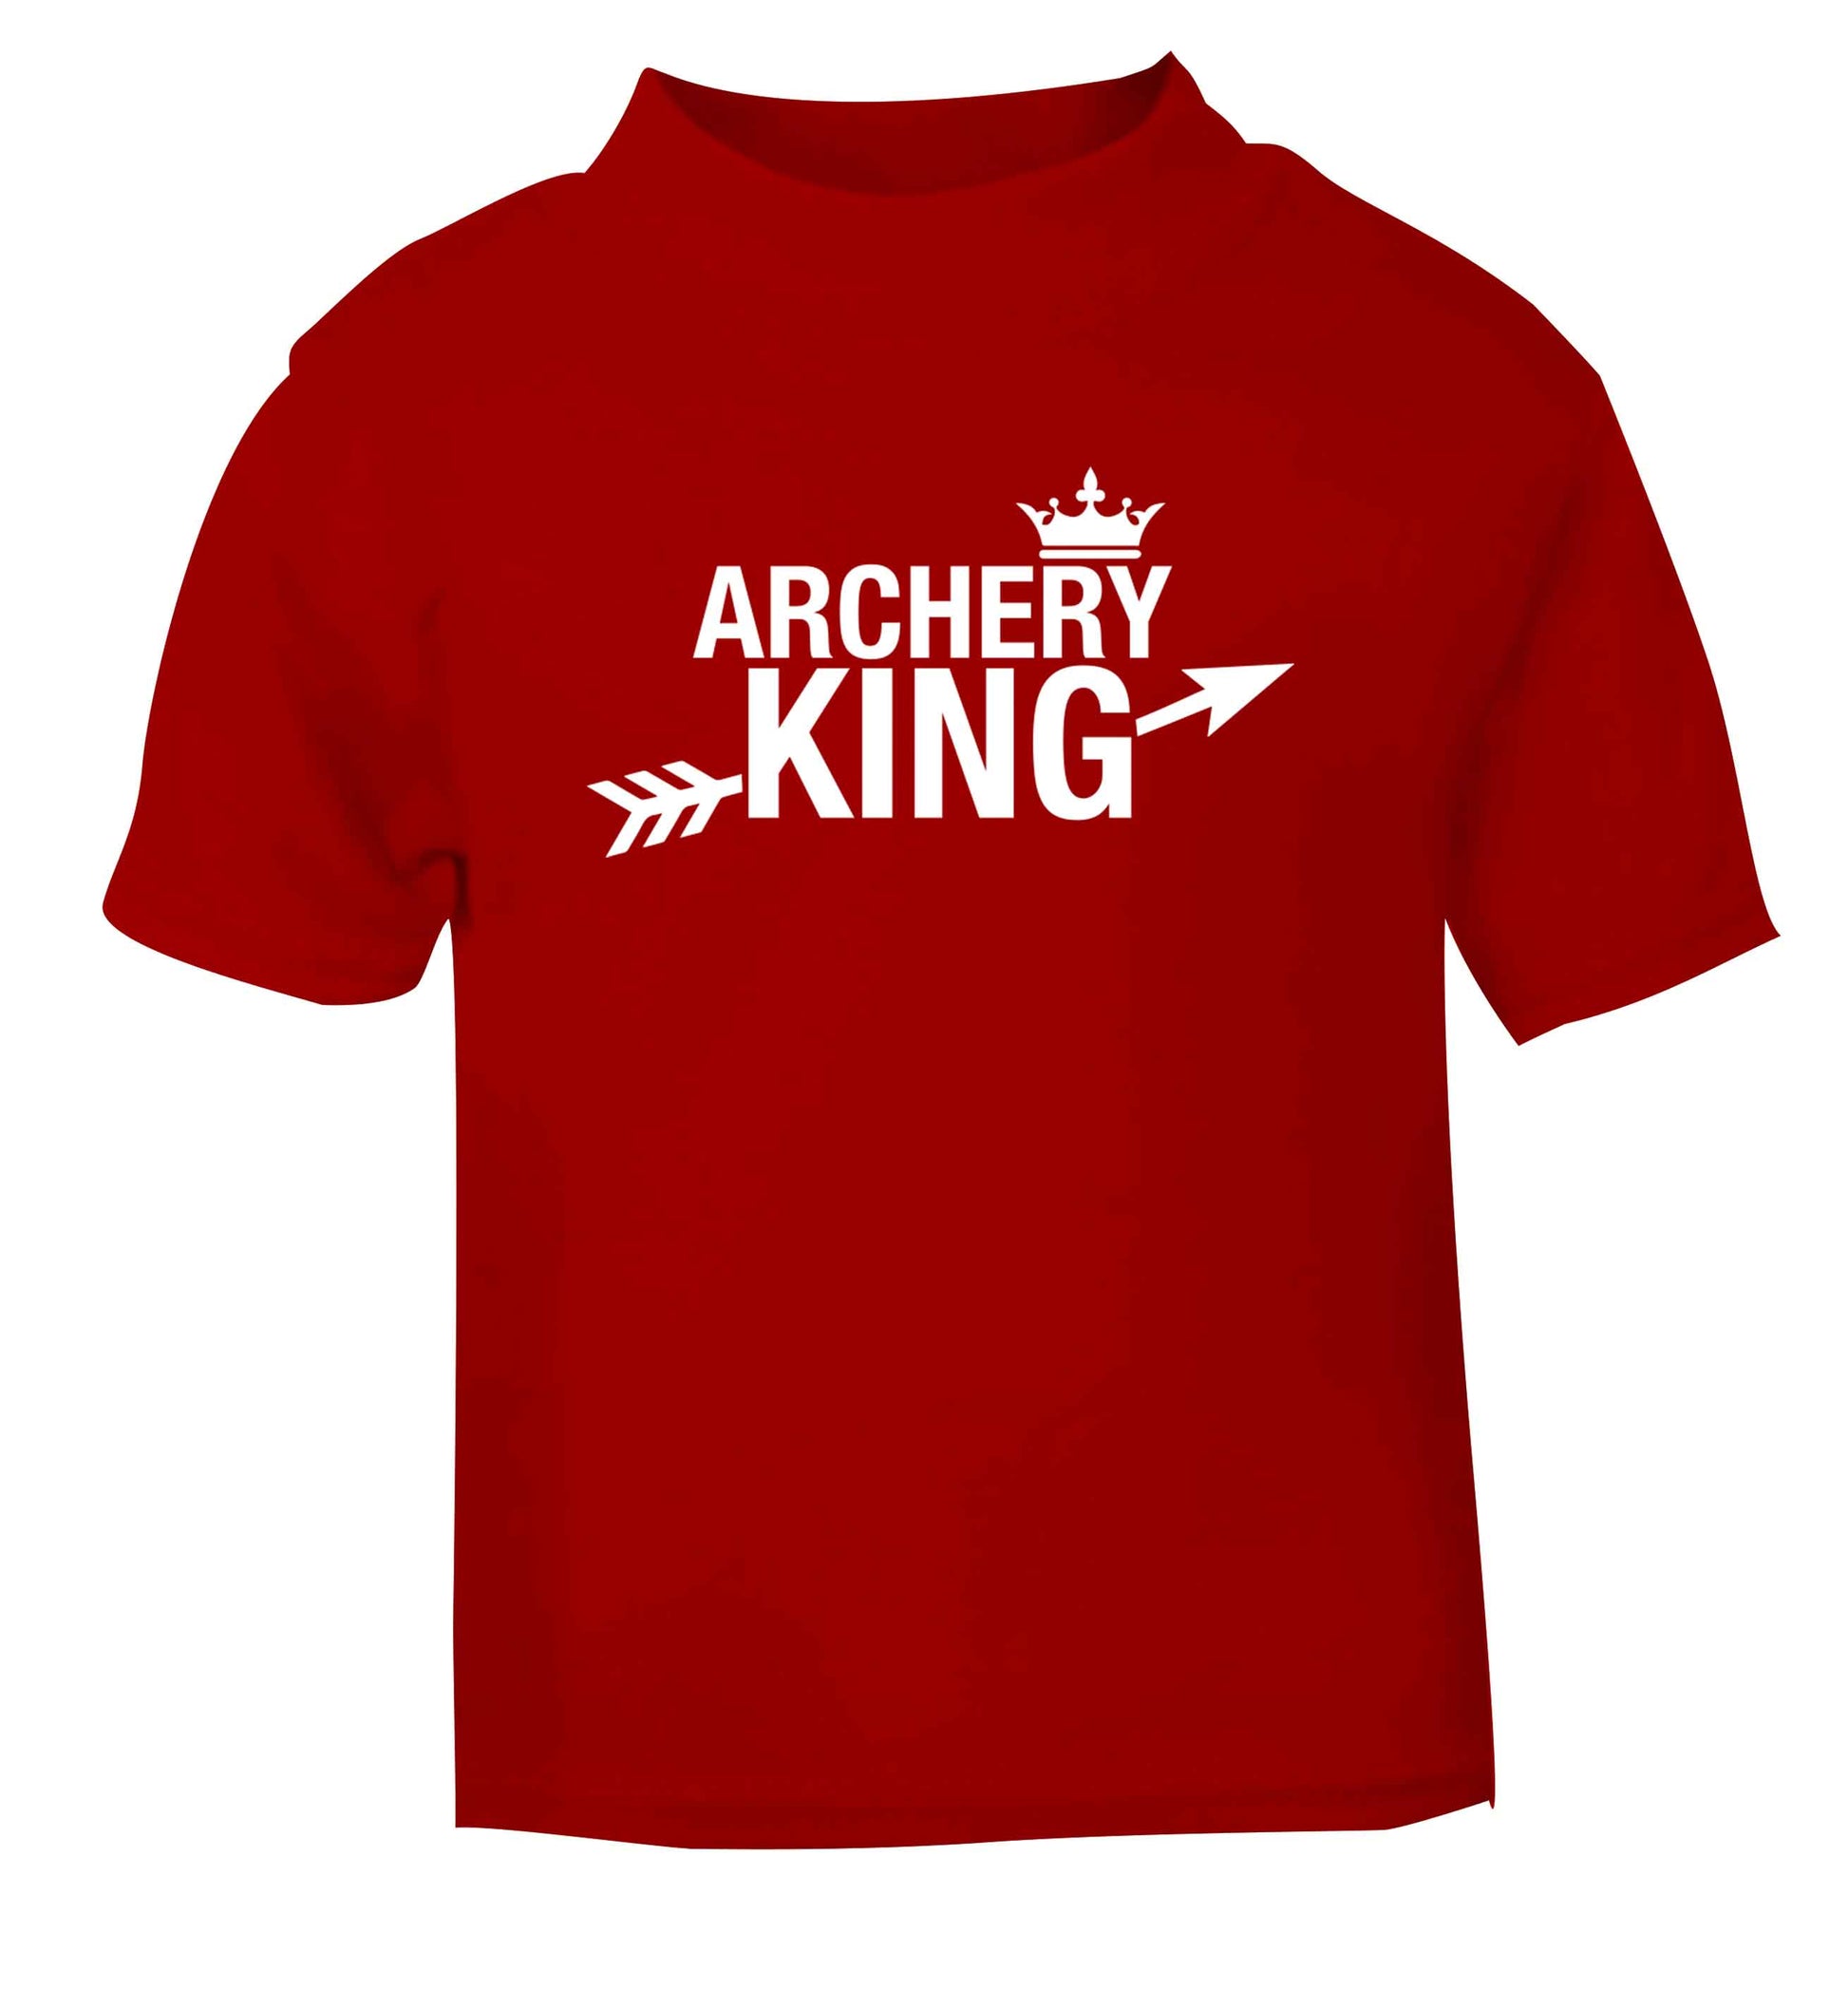 Archery king red Baby Toddler Tshirt 2 Years